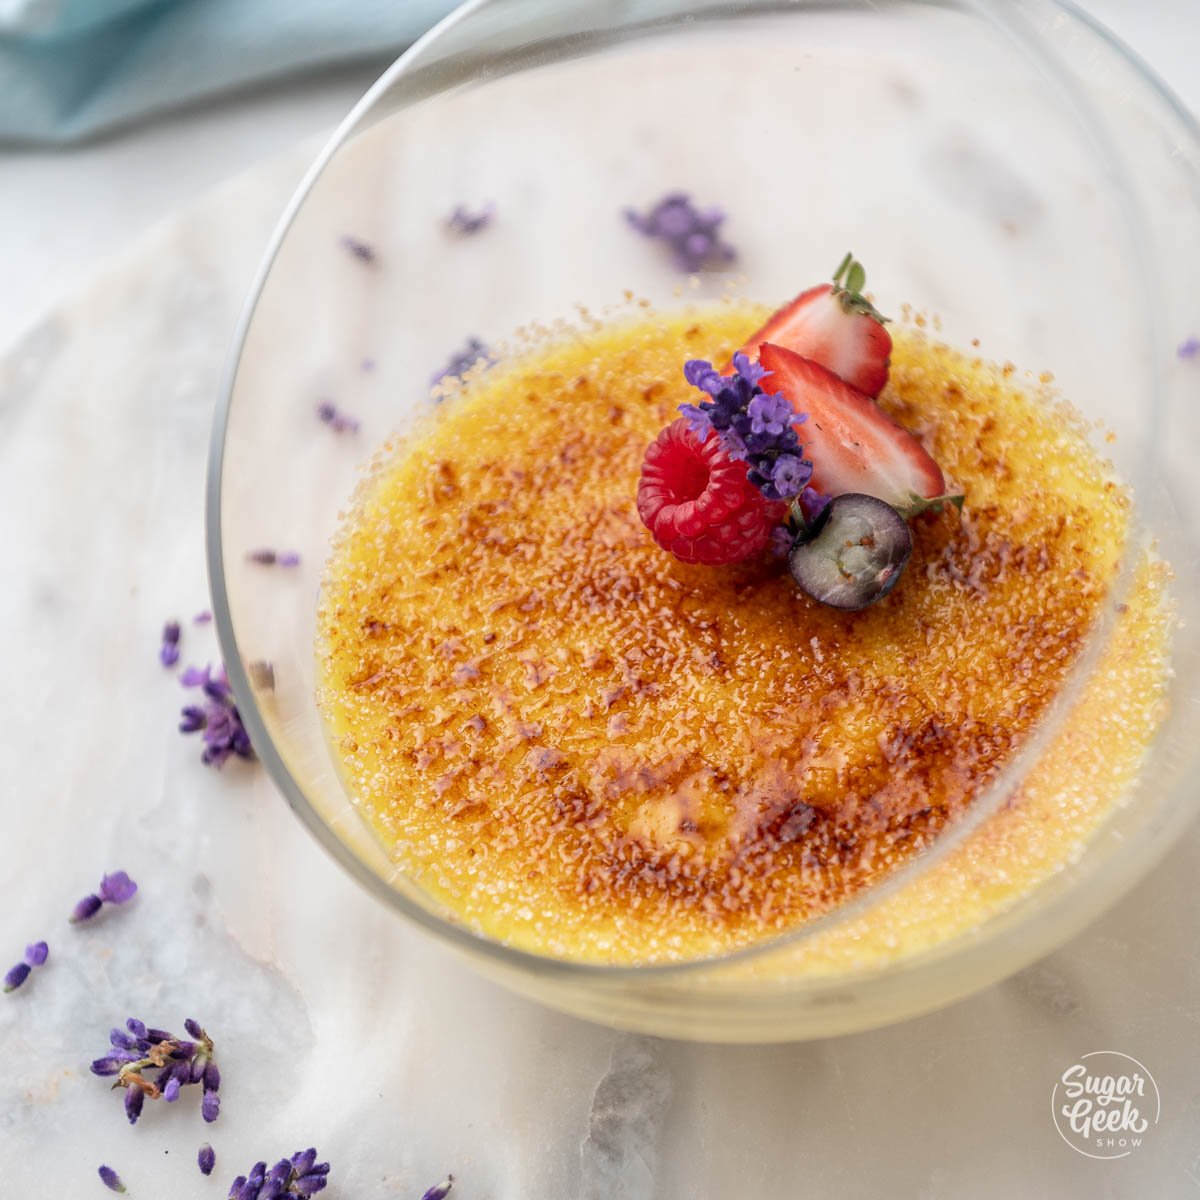 crème brûlée in a glass dish decorated with fruits and a flower